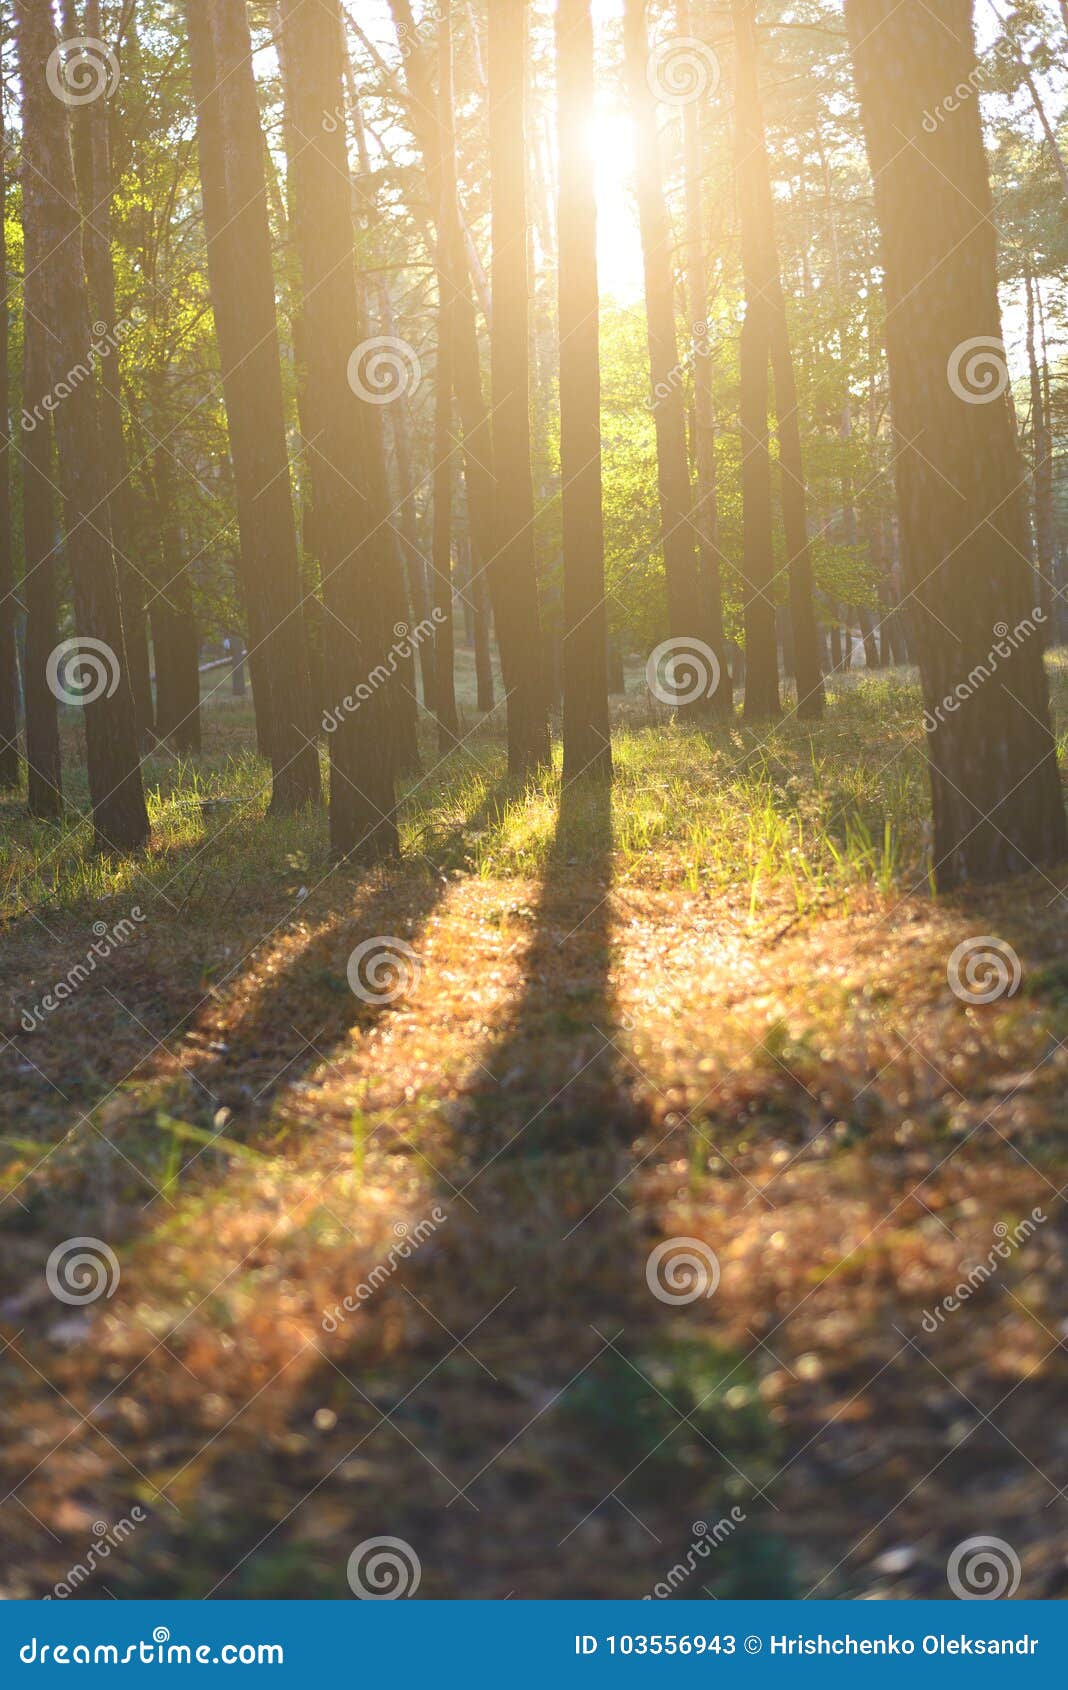 Autumn Forest In The Sunlight And Shadows Falling From The Trees Stock